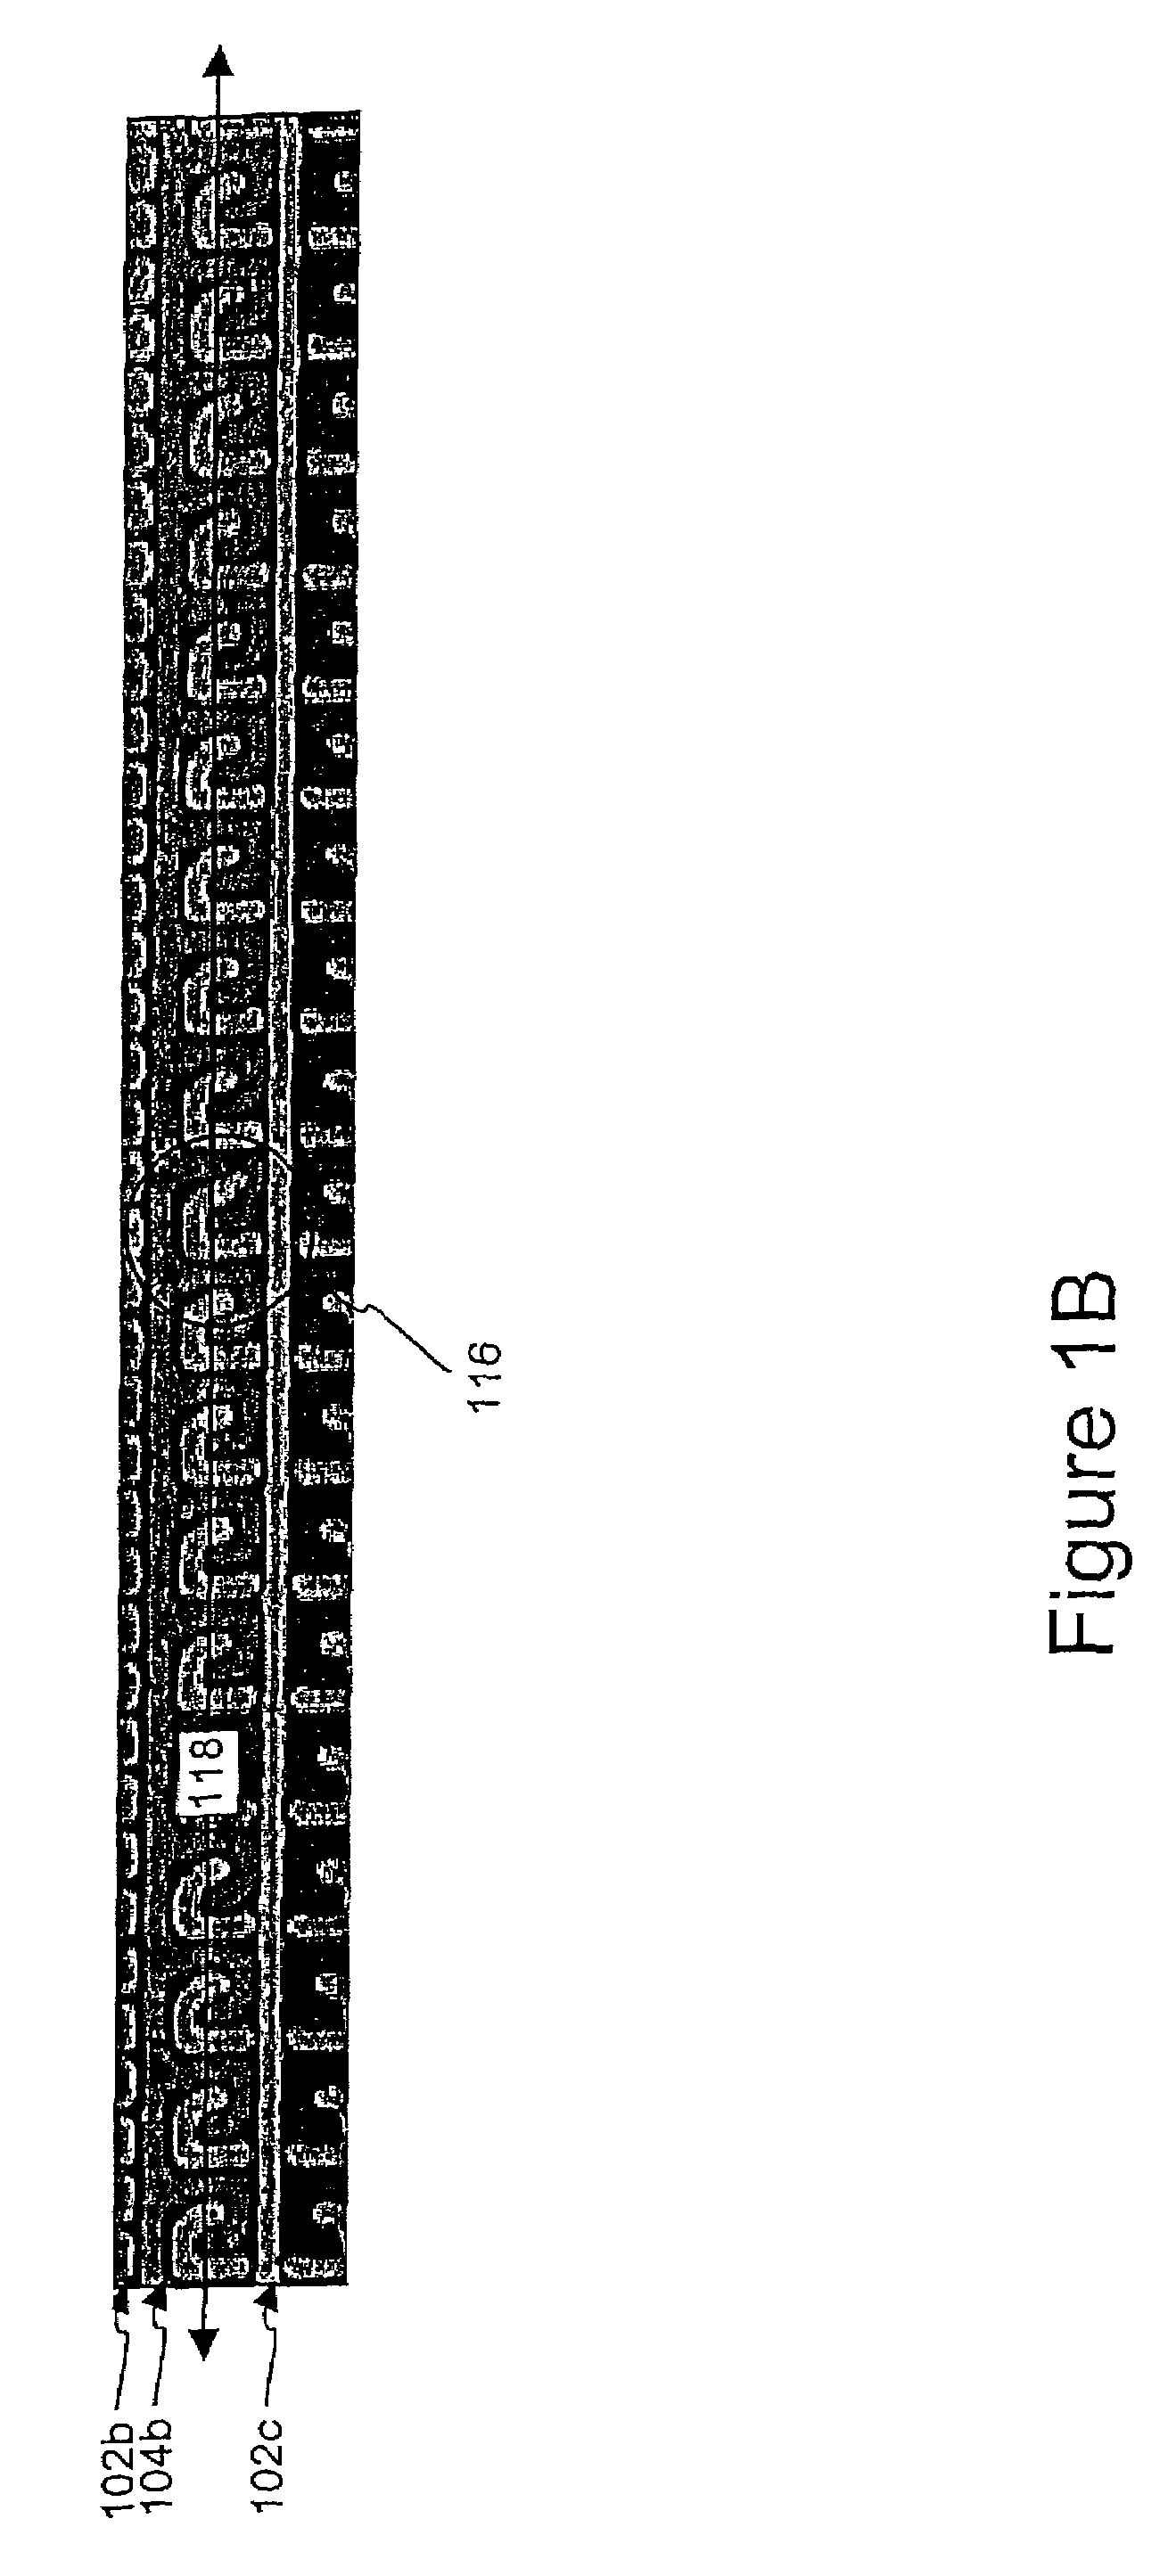 Apparatus and methods for detection of systematic defects